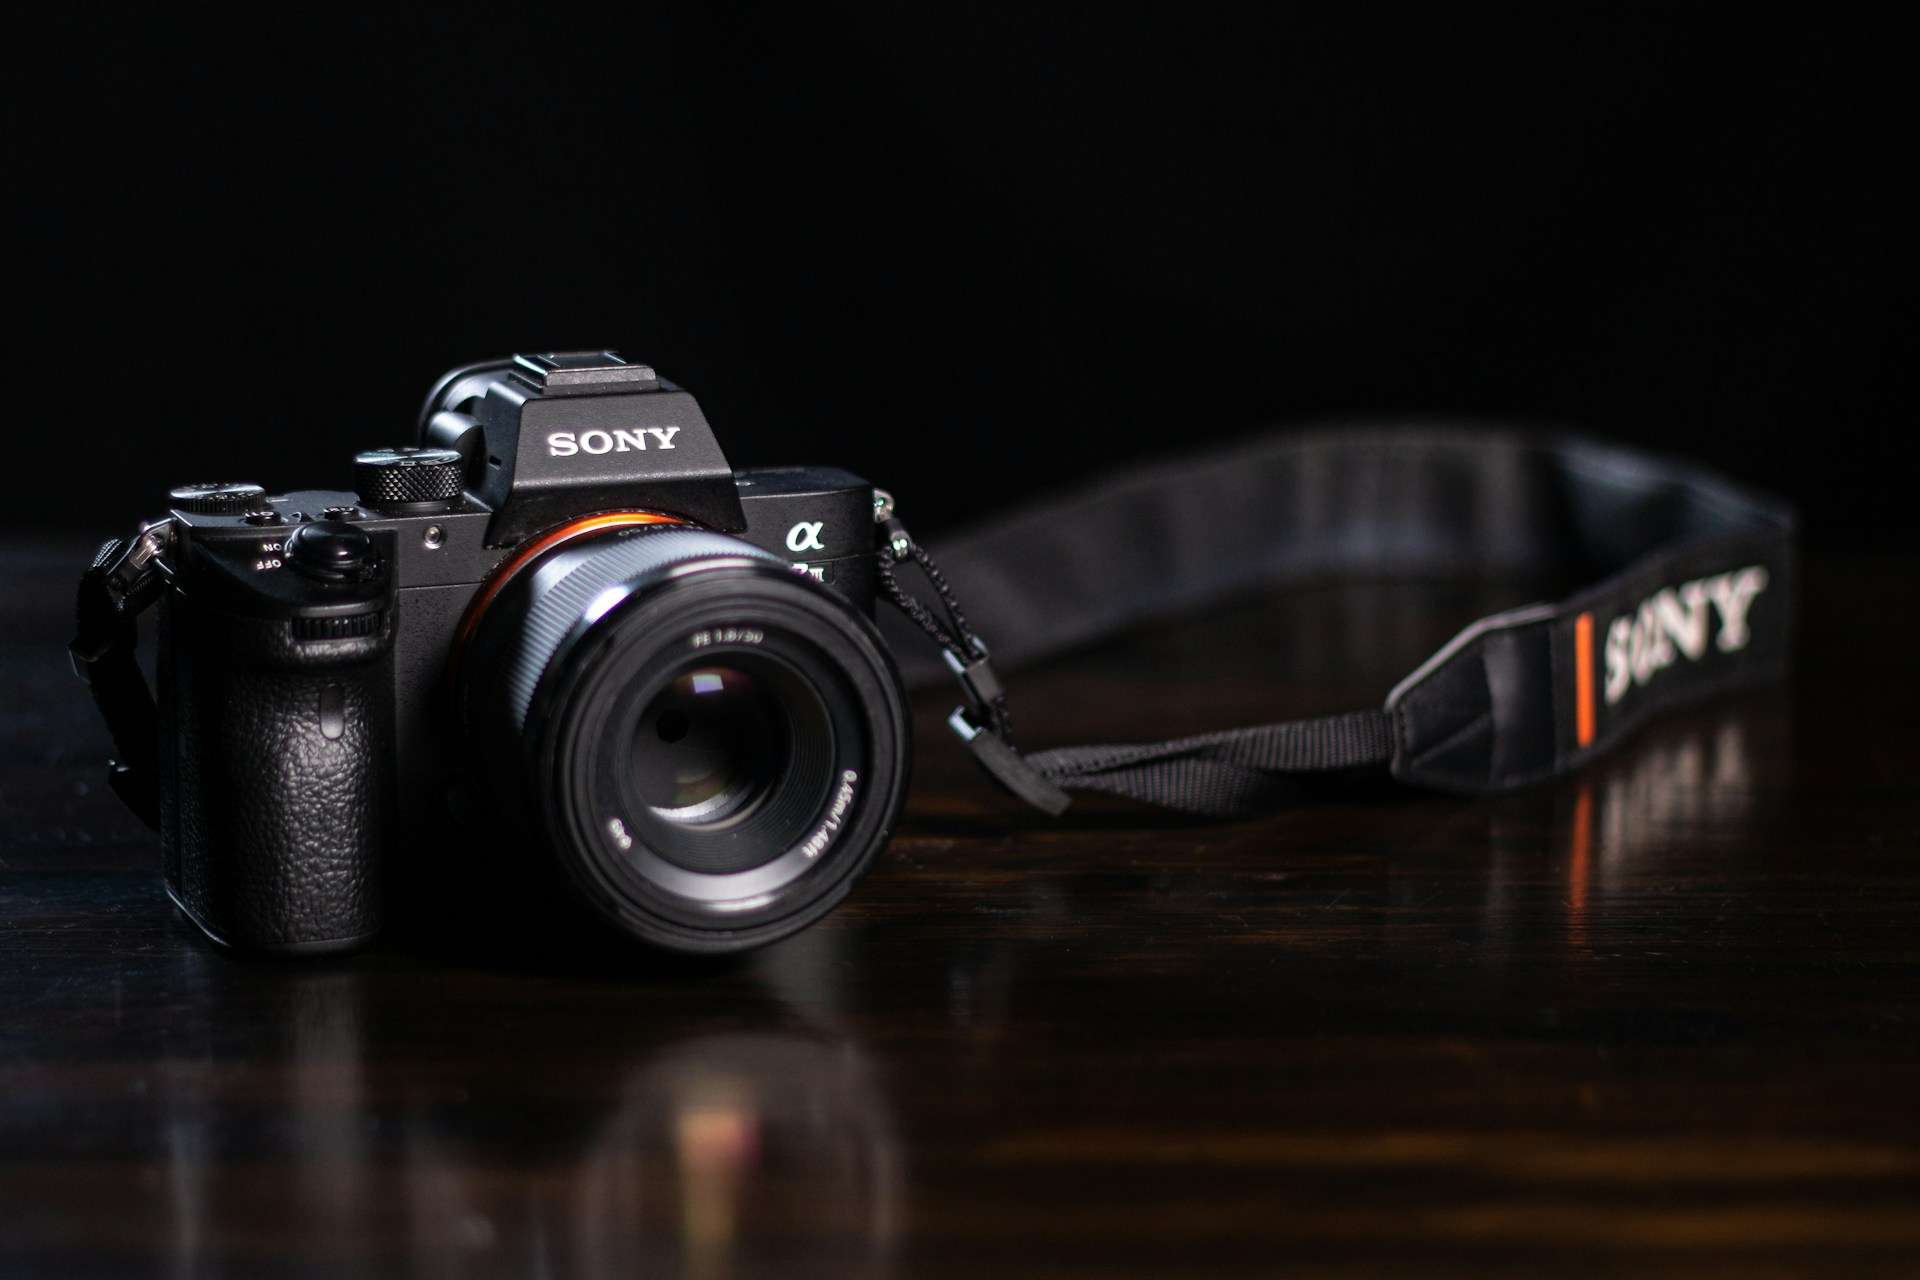 How to Attach Sony Camera Strap